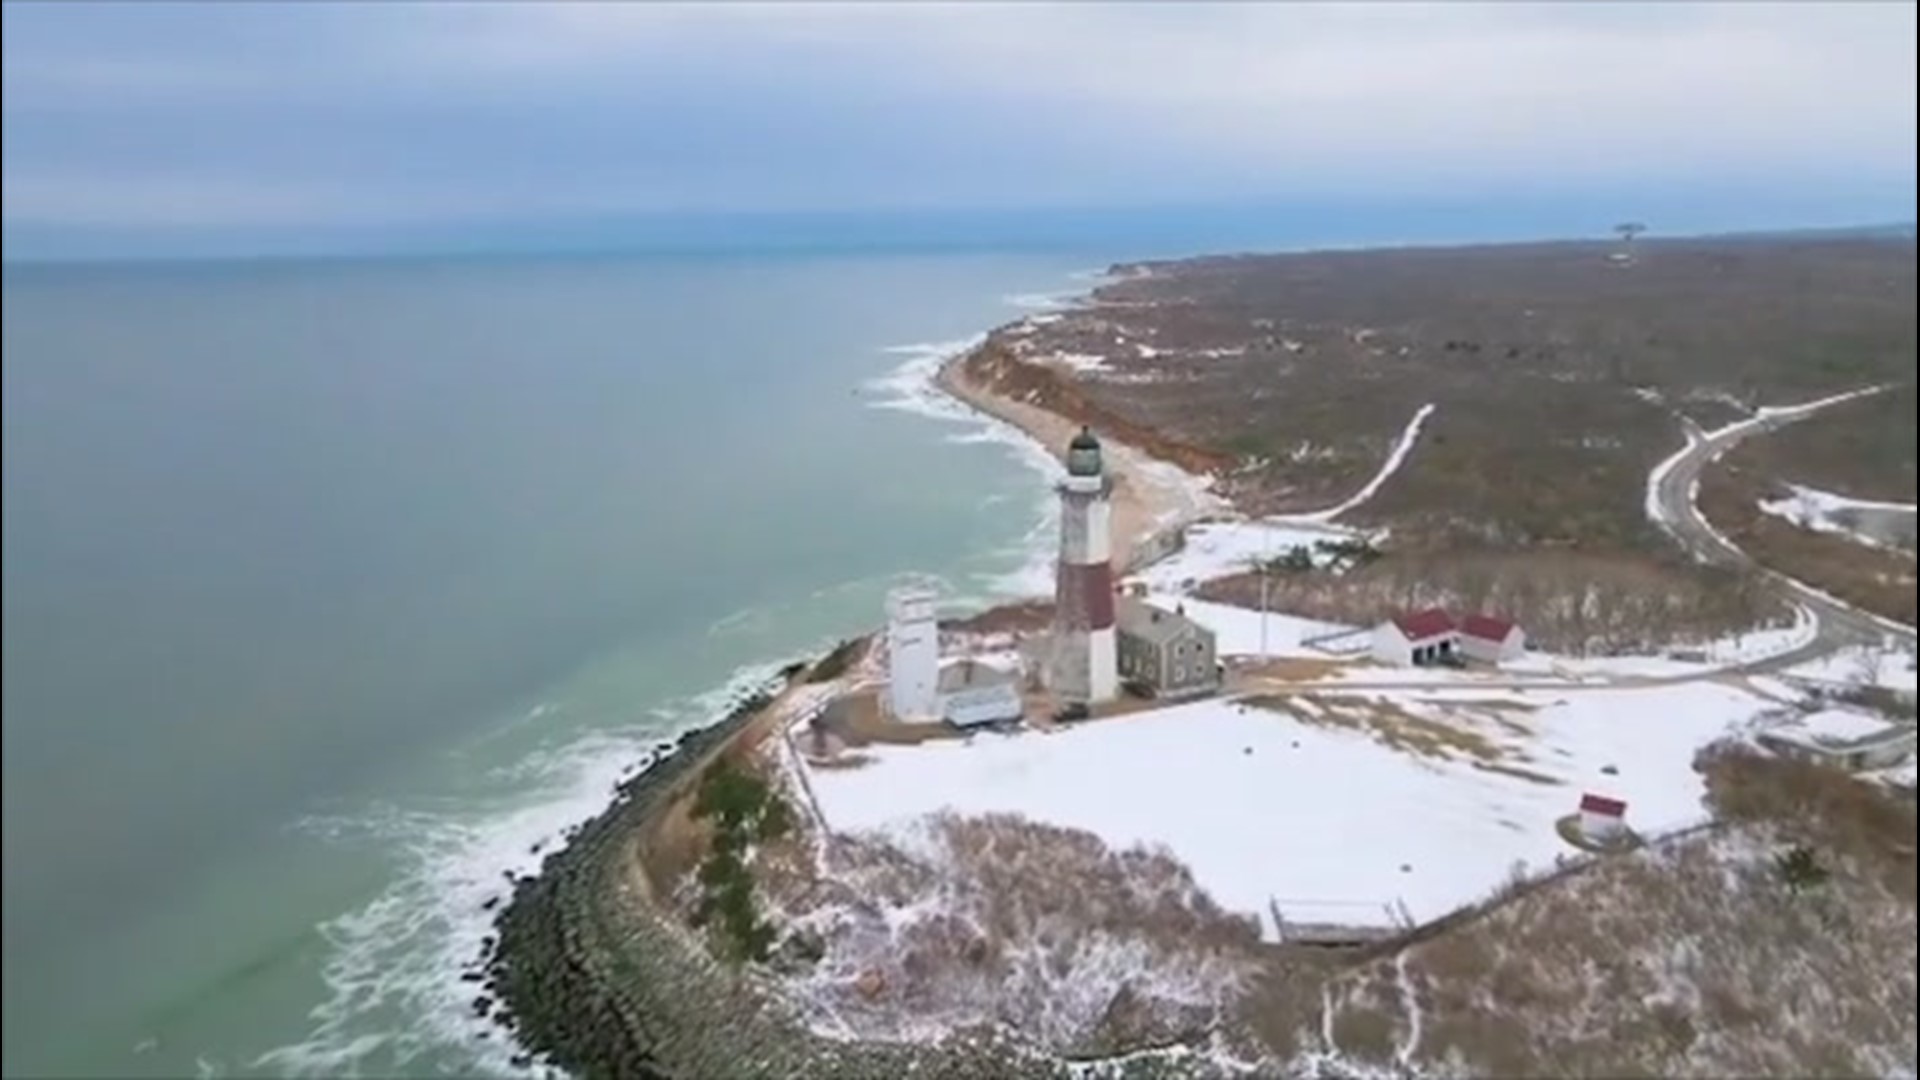 Get an aerial view of the eastern end of Long Island on a crisp February day.